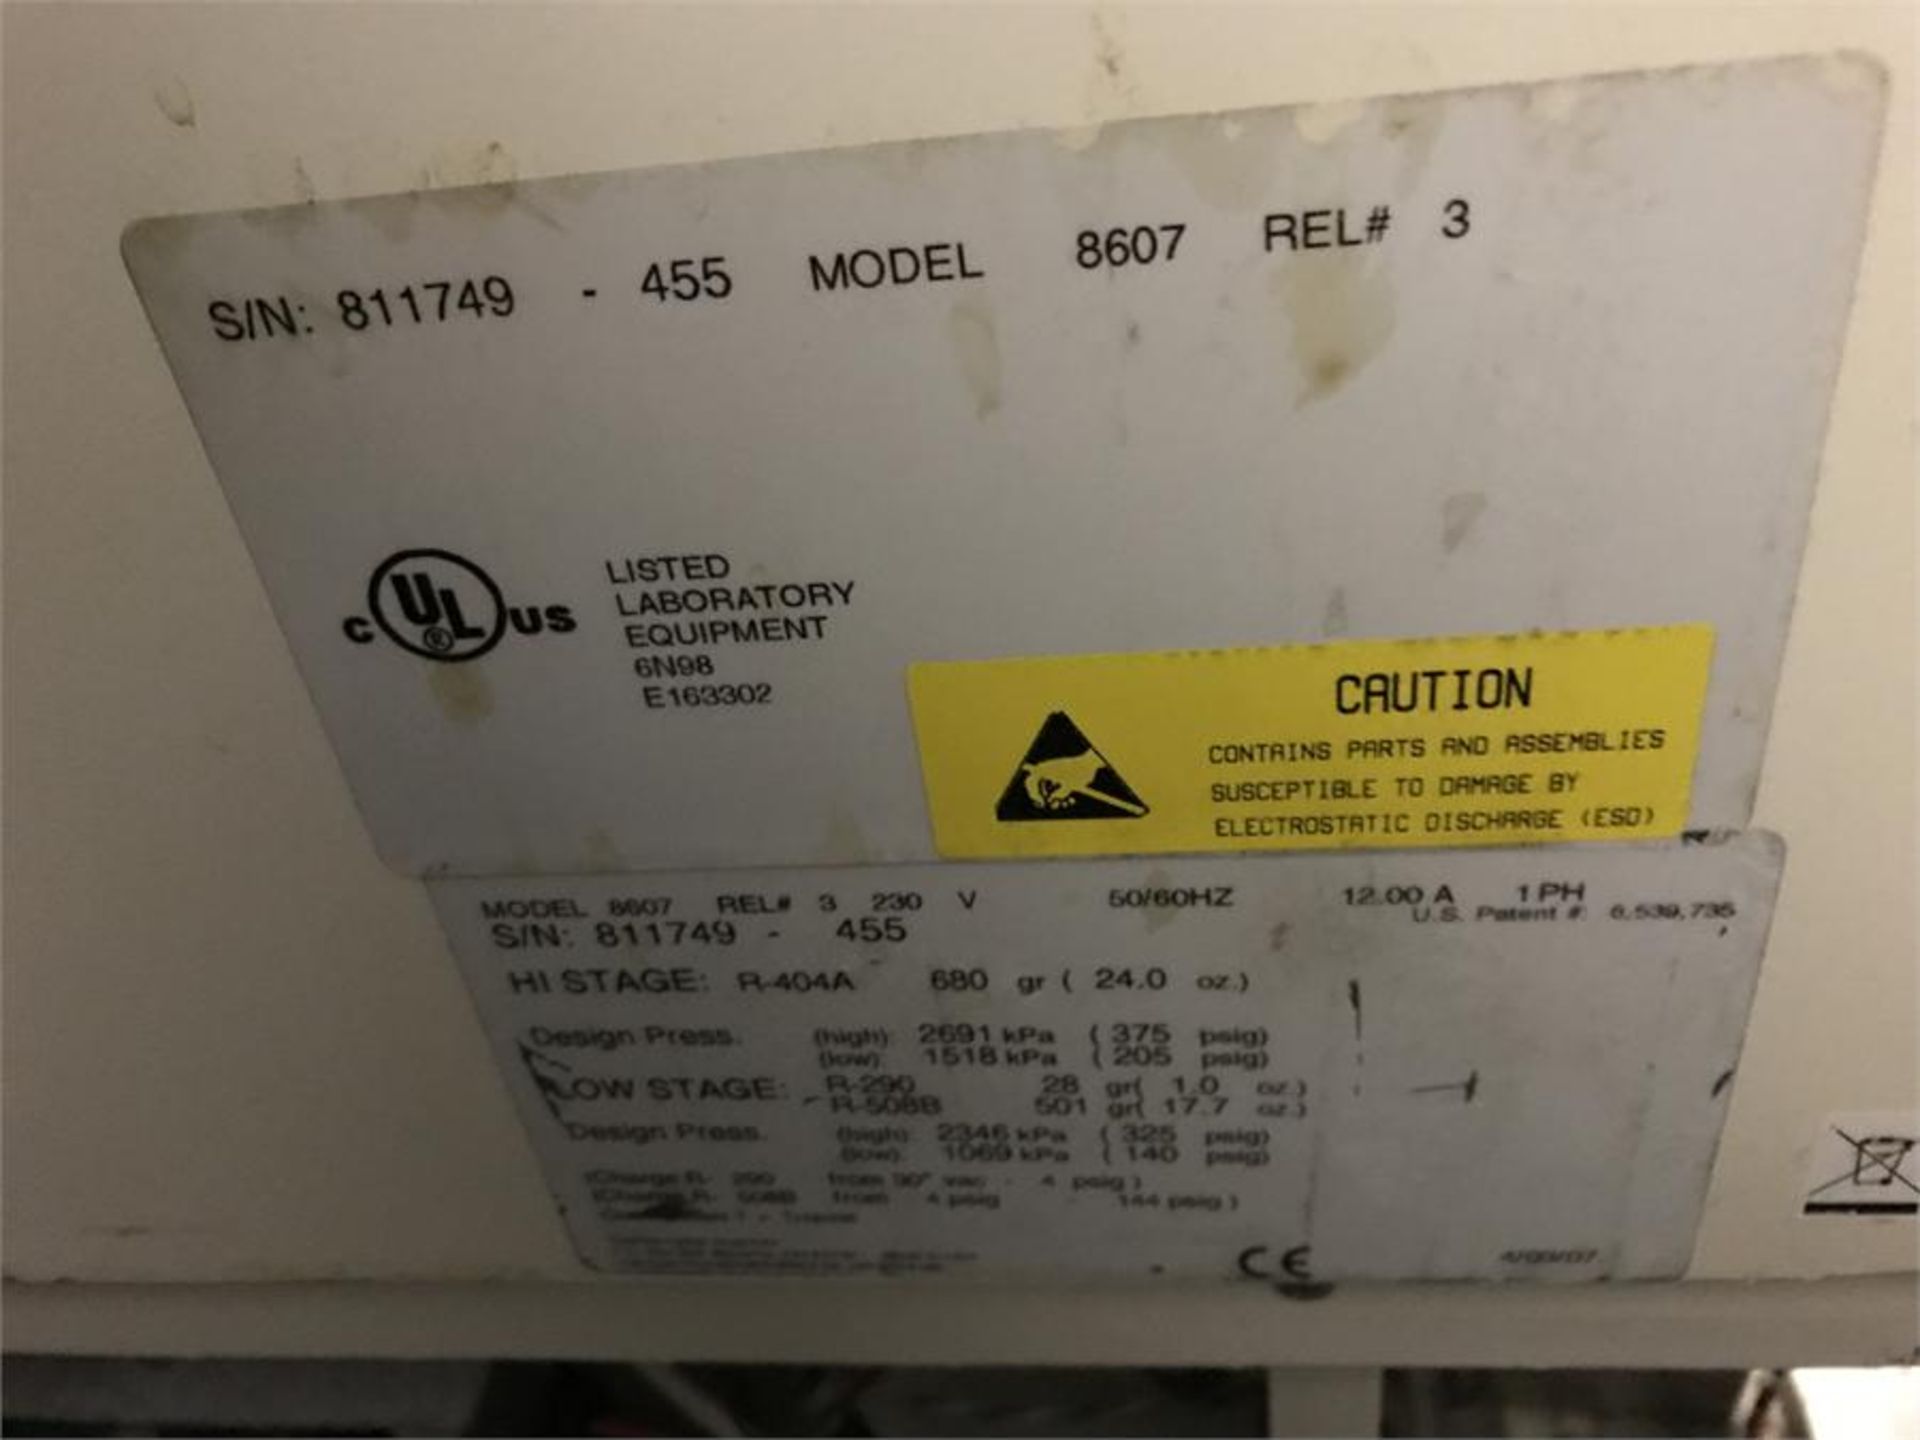 Thermo Forma 8607 Ultra Low Temperature Freezer - Image 3 of 3